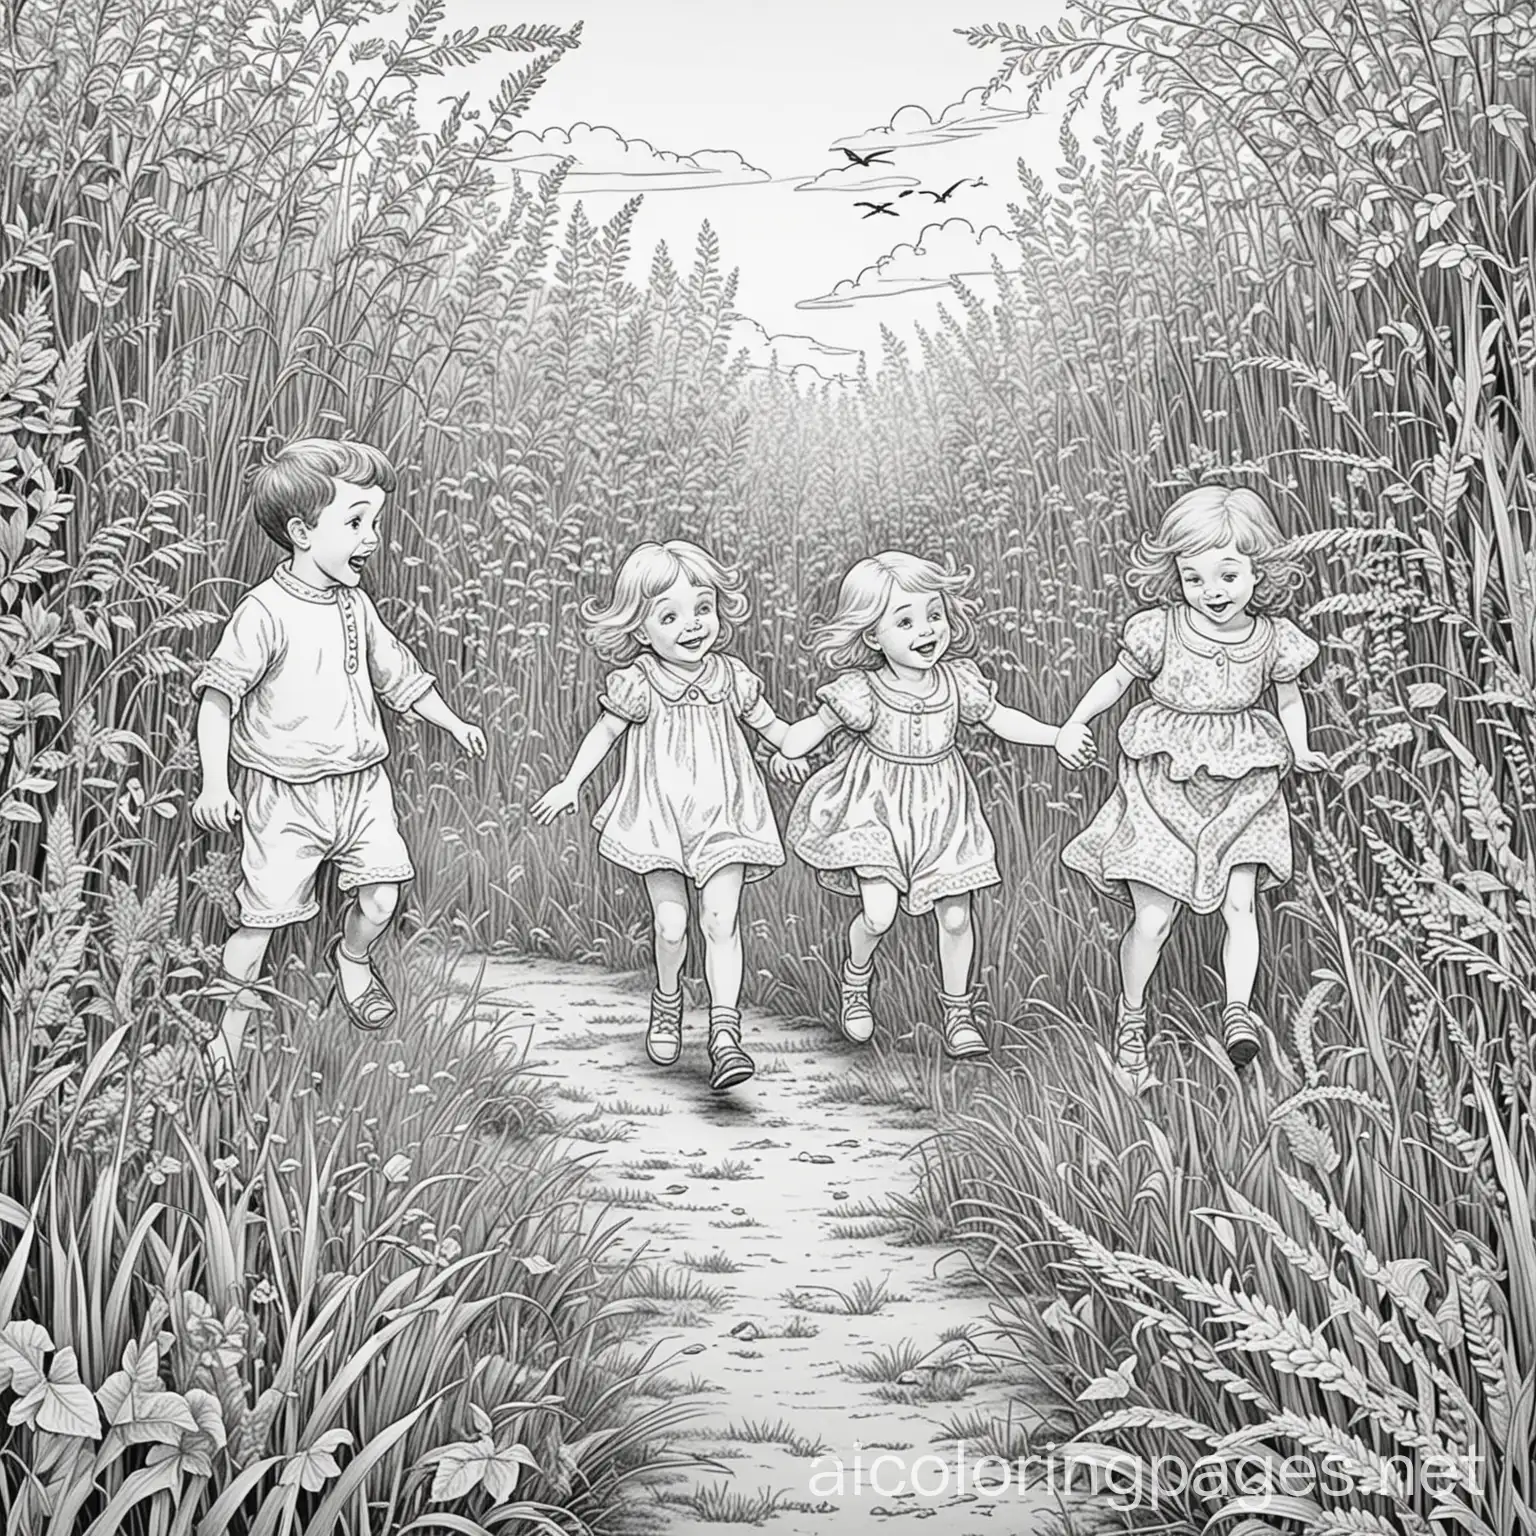 Once upon a time, in a meadow nestled at the edge of the Enchanted Forest, there lived a group of lively toddlers and giggly infants. Their tiny legs wiggled with boundless energy, and their laughter echoed through the tall grass. But there was a problem—their wiggles were getting out of control! Coloring Page, black and white, line art, white background, Simplicity, Ample White Space. The background of the coloring page is plain white to make it easy for young children to color within the lines. The outlines of all the subjects are easy to distinguish, making it simple for kids to color without too much difficulty